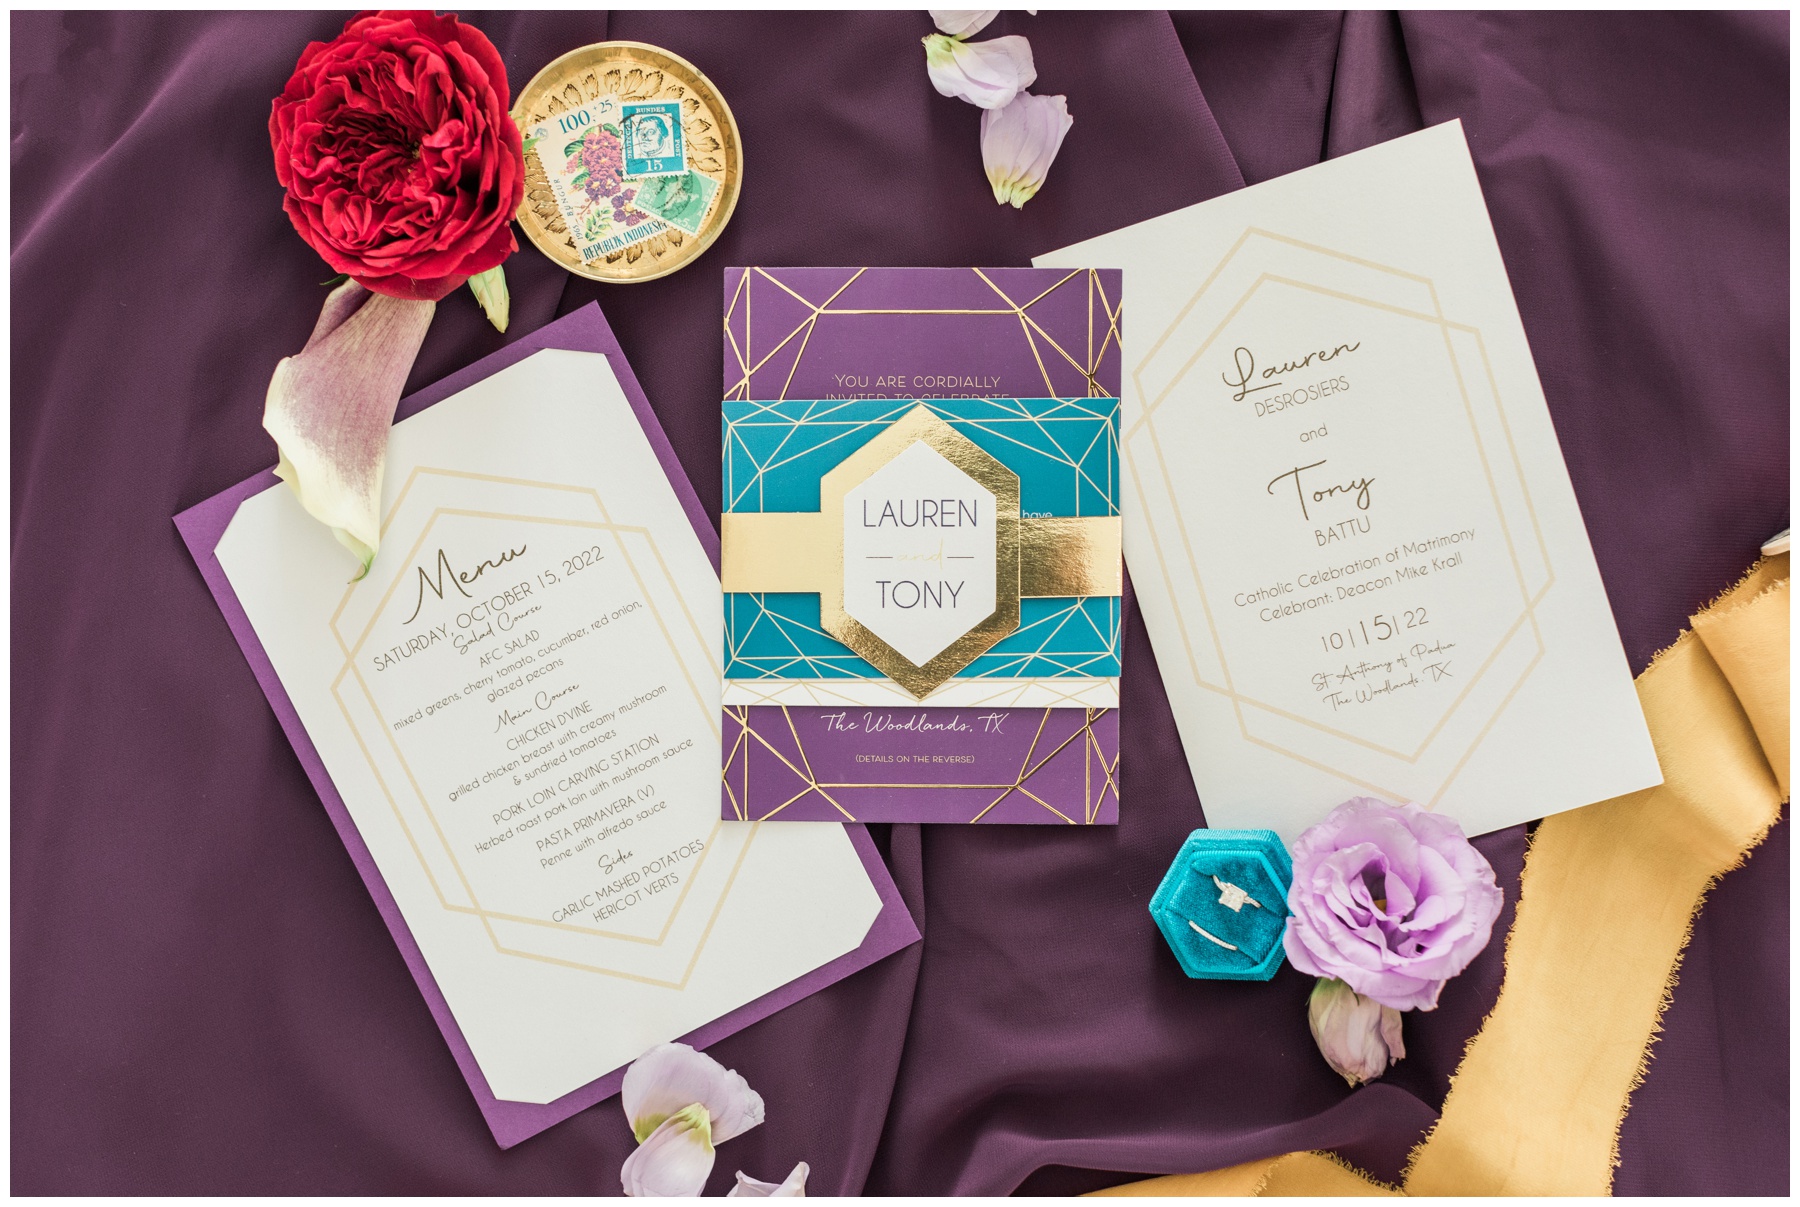 Multicultural wedding invitation with gold details